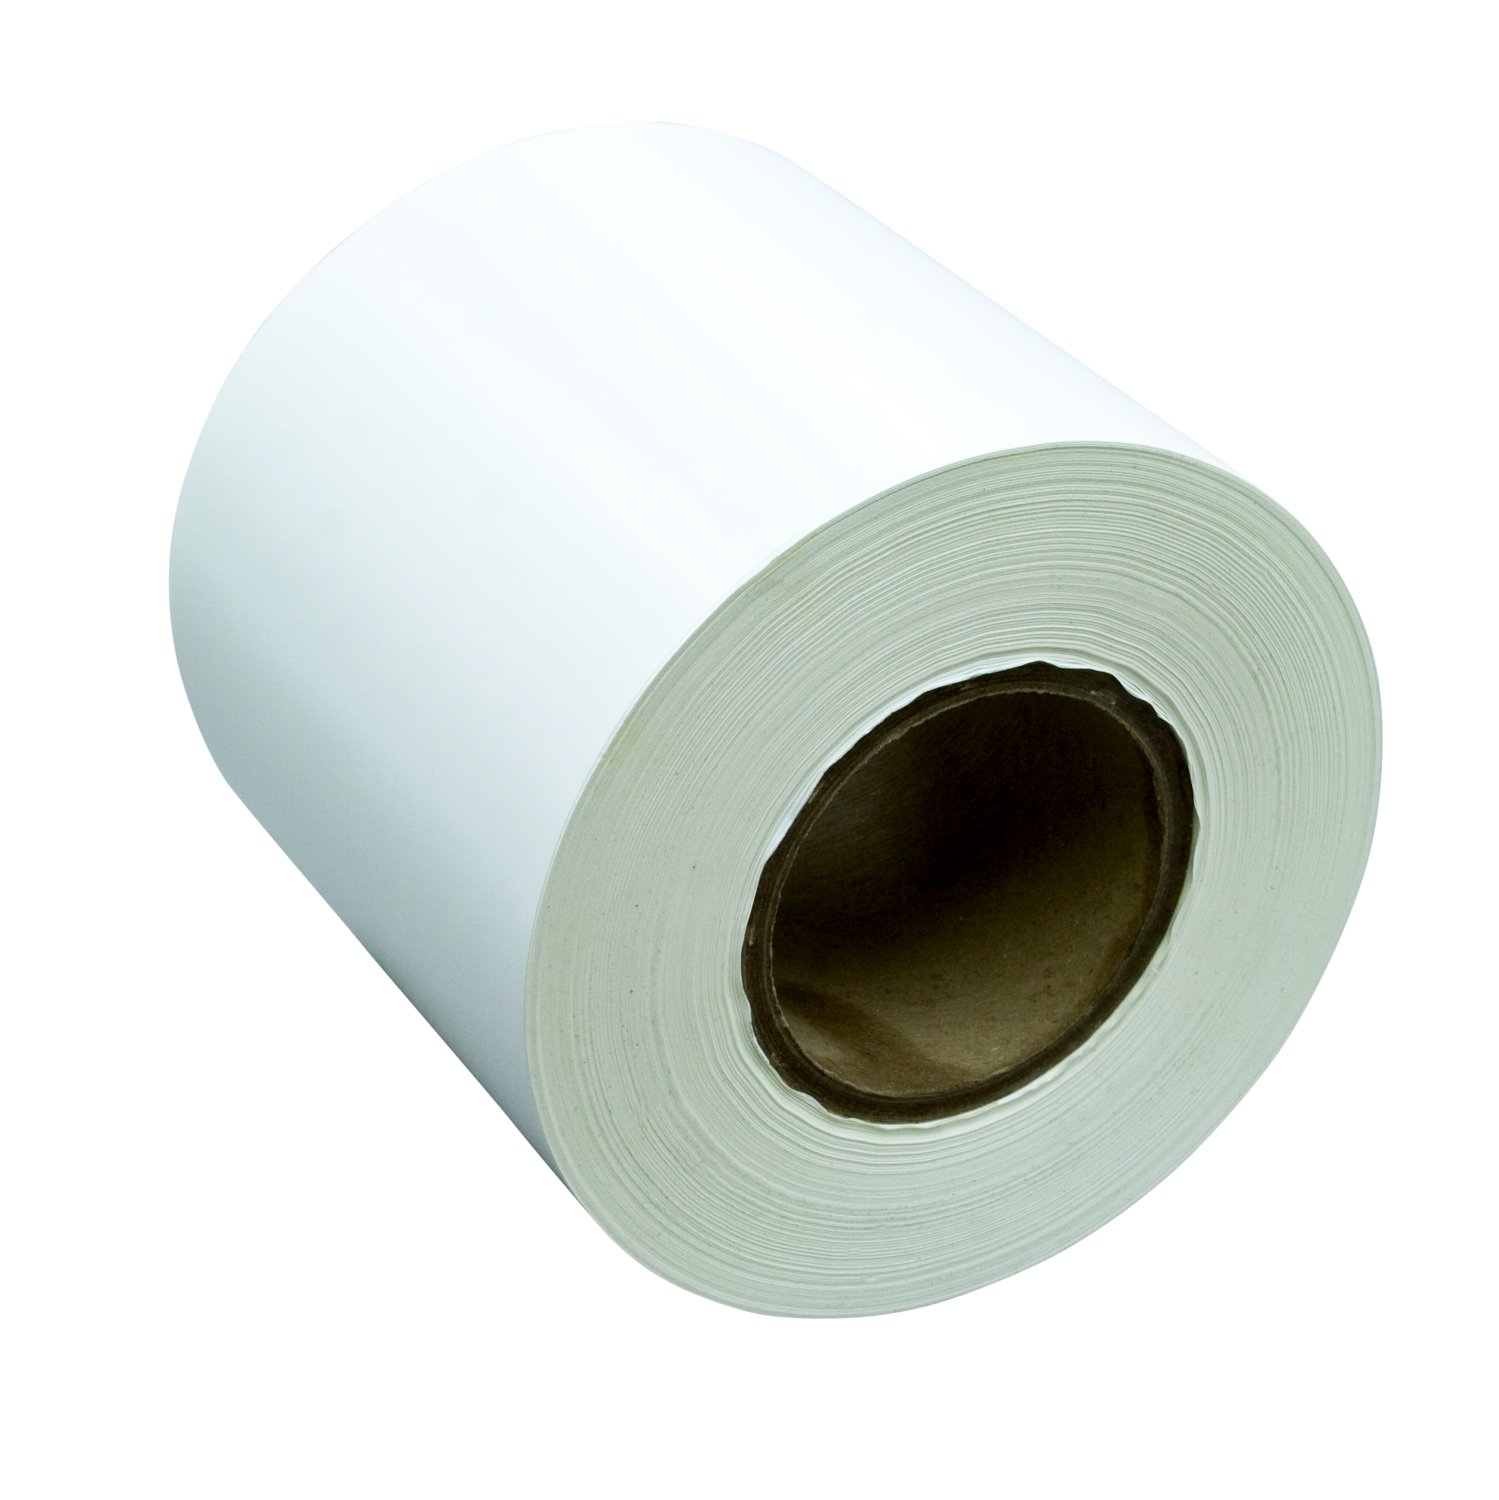 7100005967 - 3M Removable Label Material 7600, White Vinyl Gloss, Roll, Config